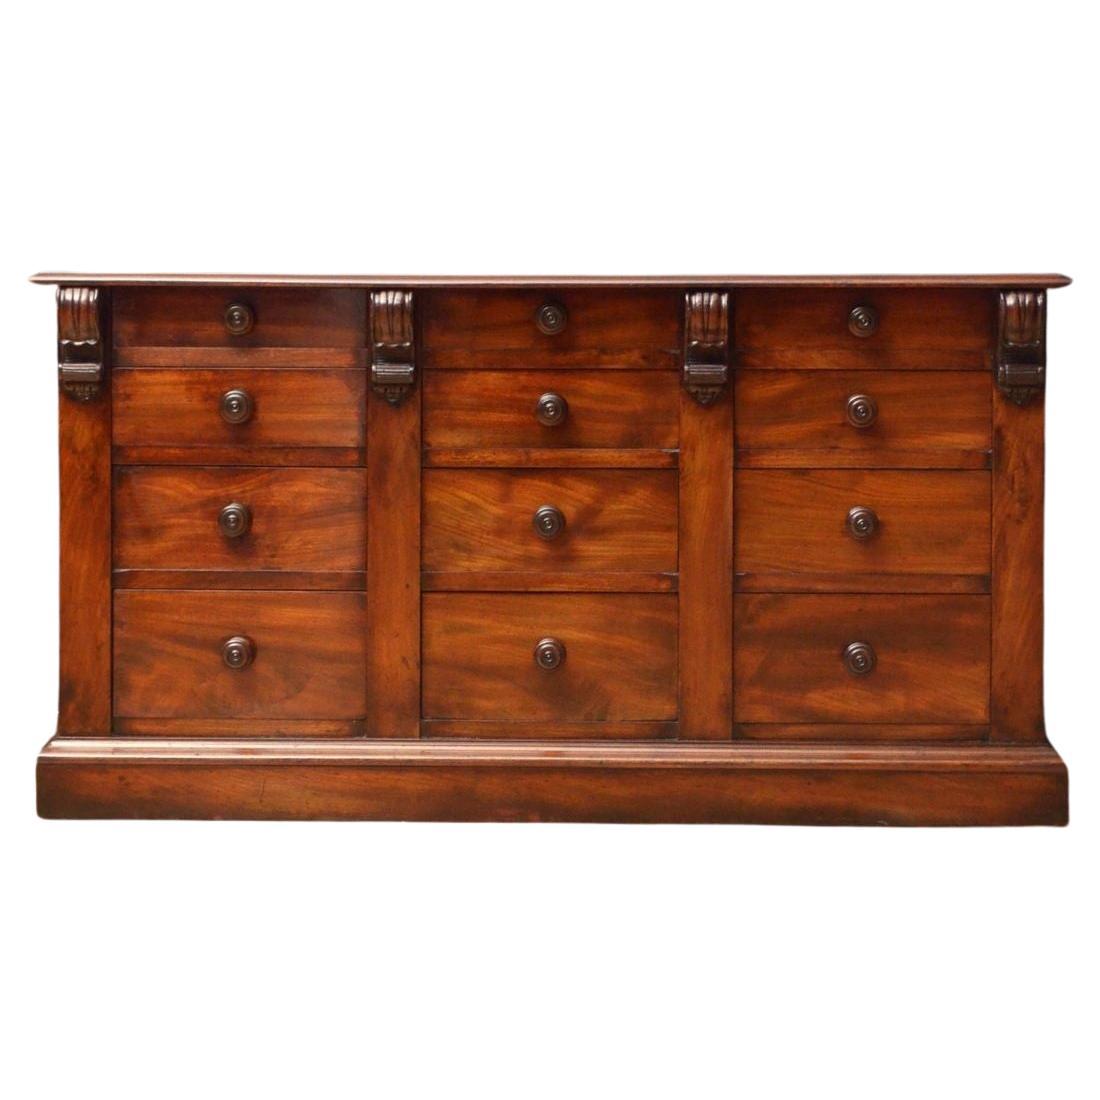 William IV Low Mahogany Chest of Drawers